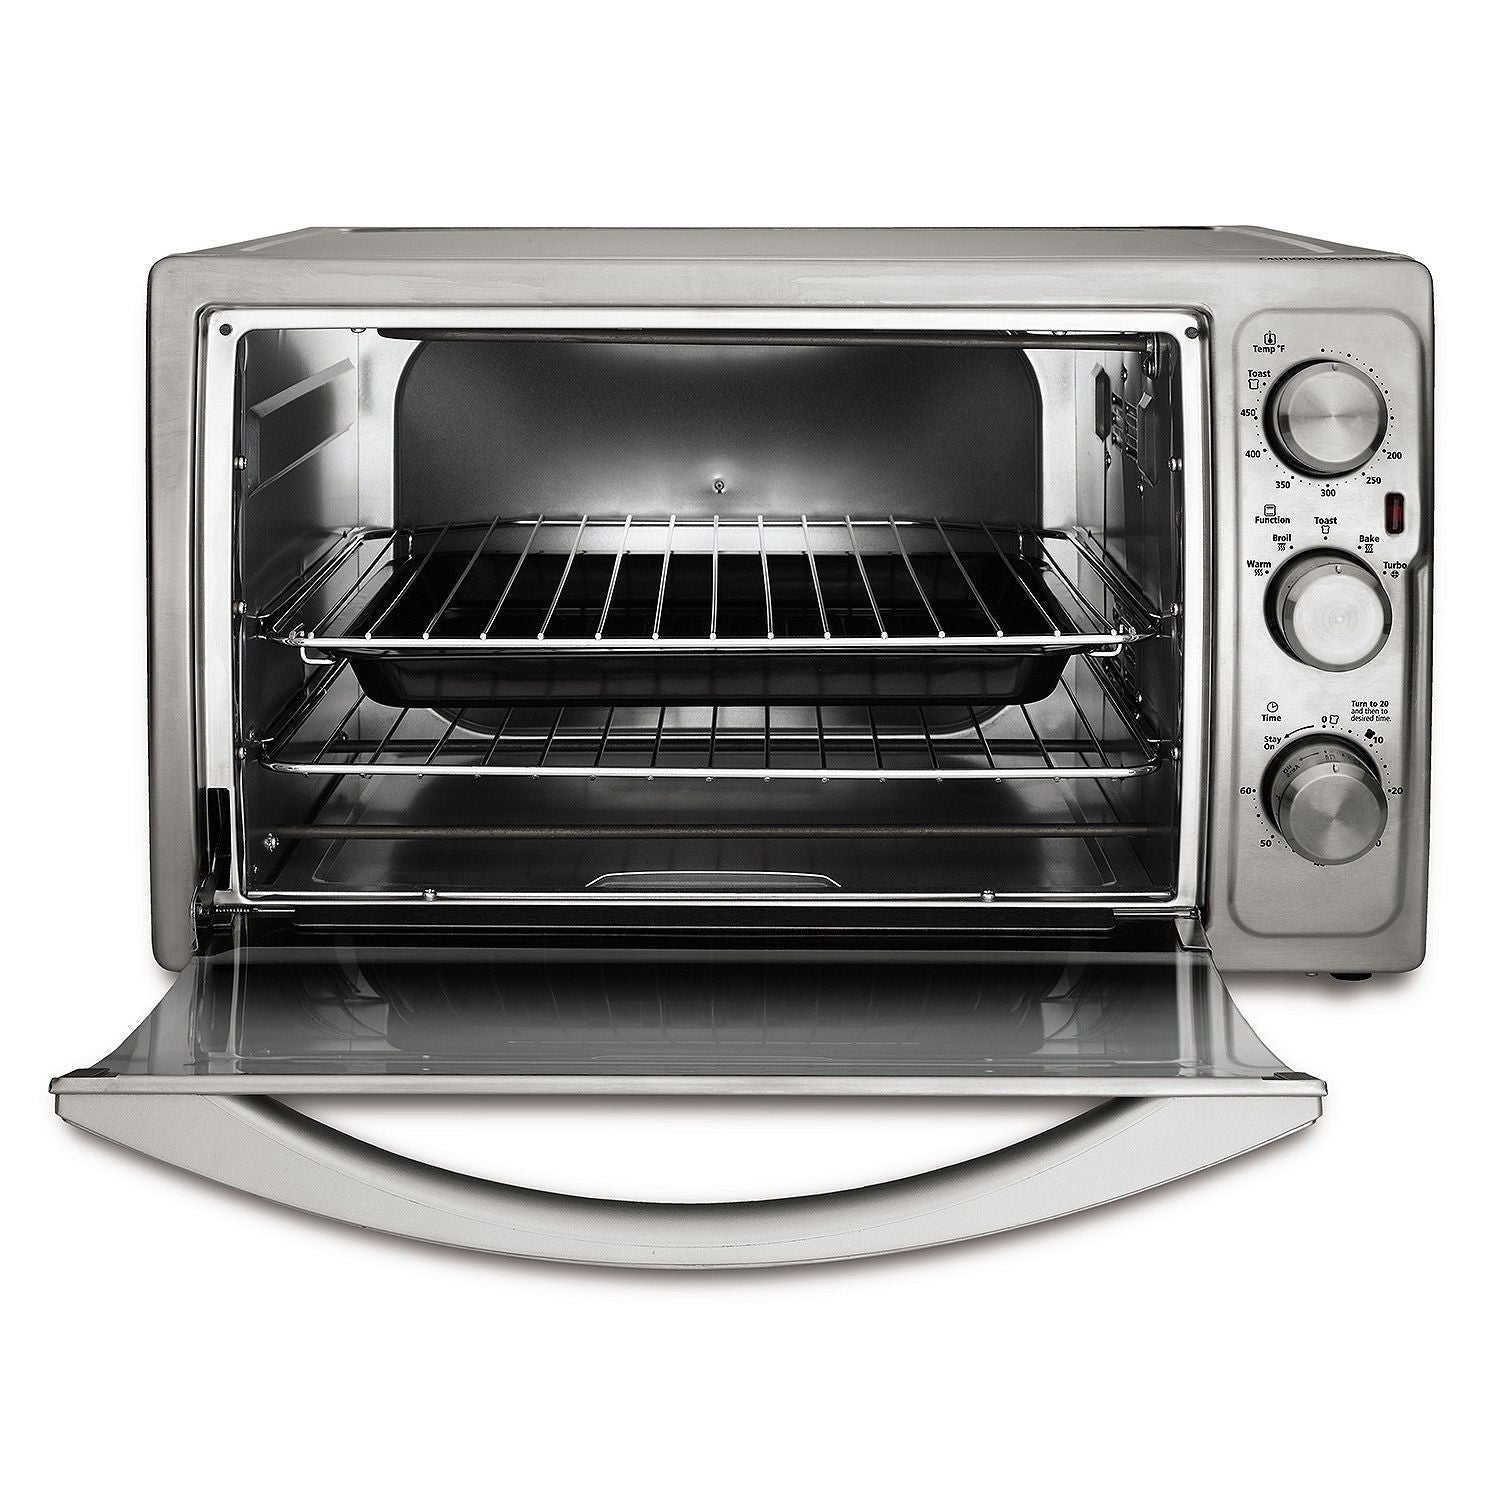  Oster Toaster Oven, 7-in-1 Countertop Toaster Oven